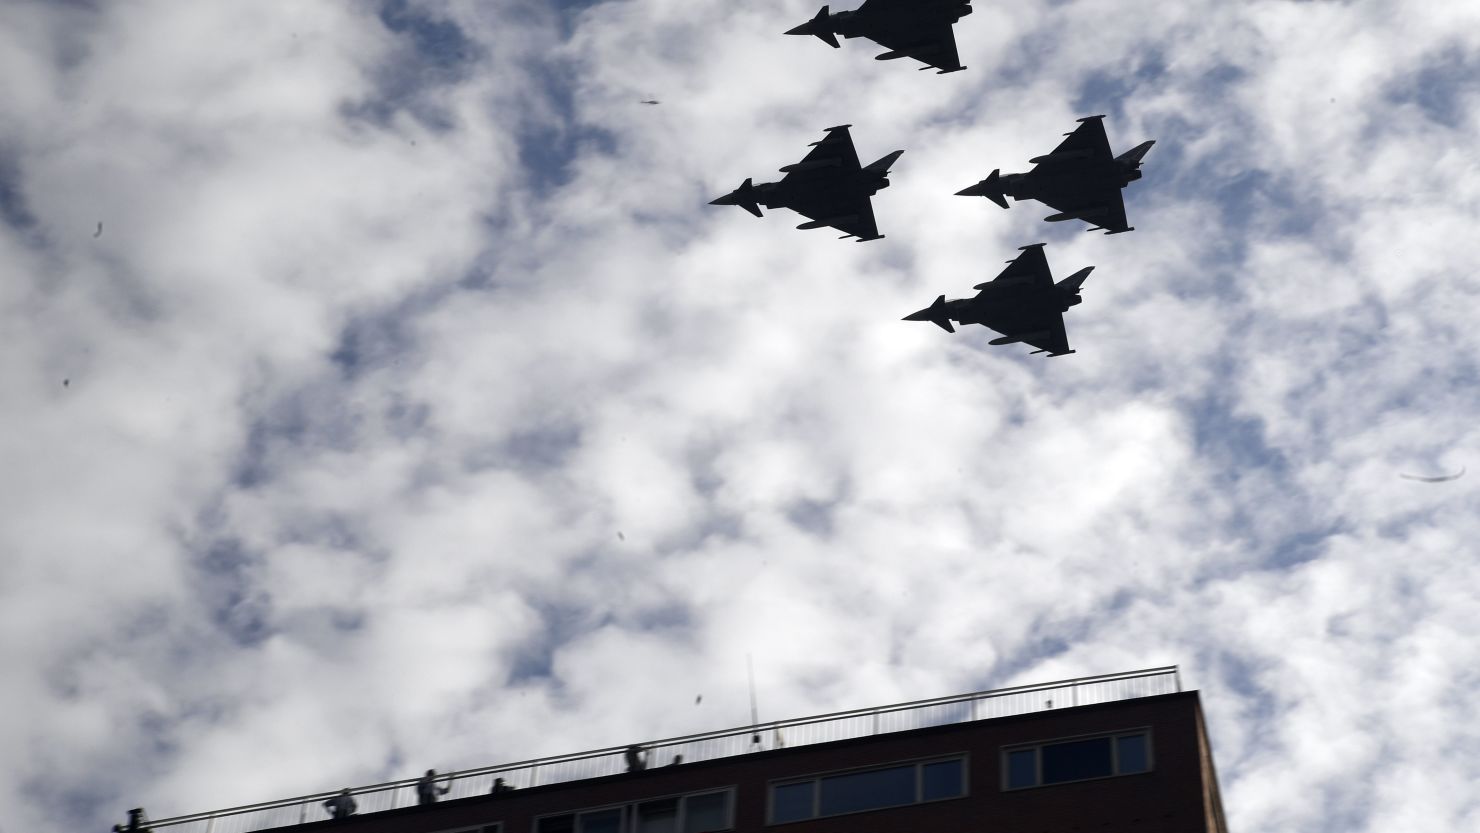 Spanish Eurofighter planes fly during the Spanish National Day military parade in Madrid on Thursday.
